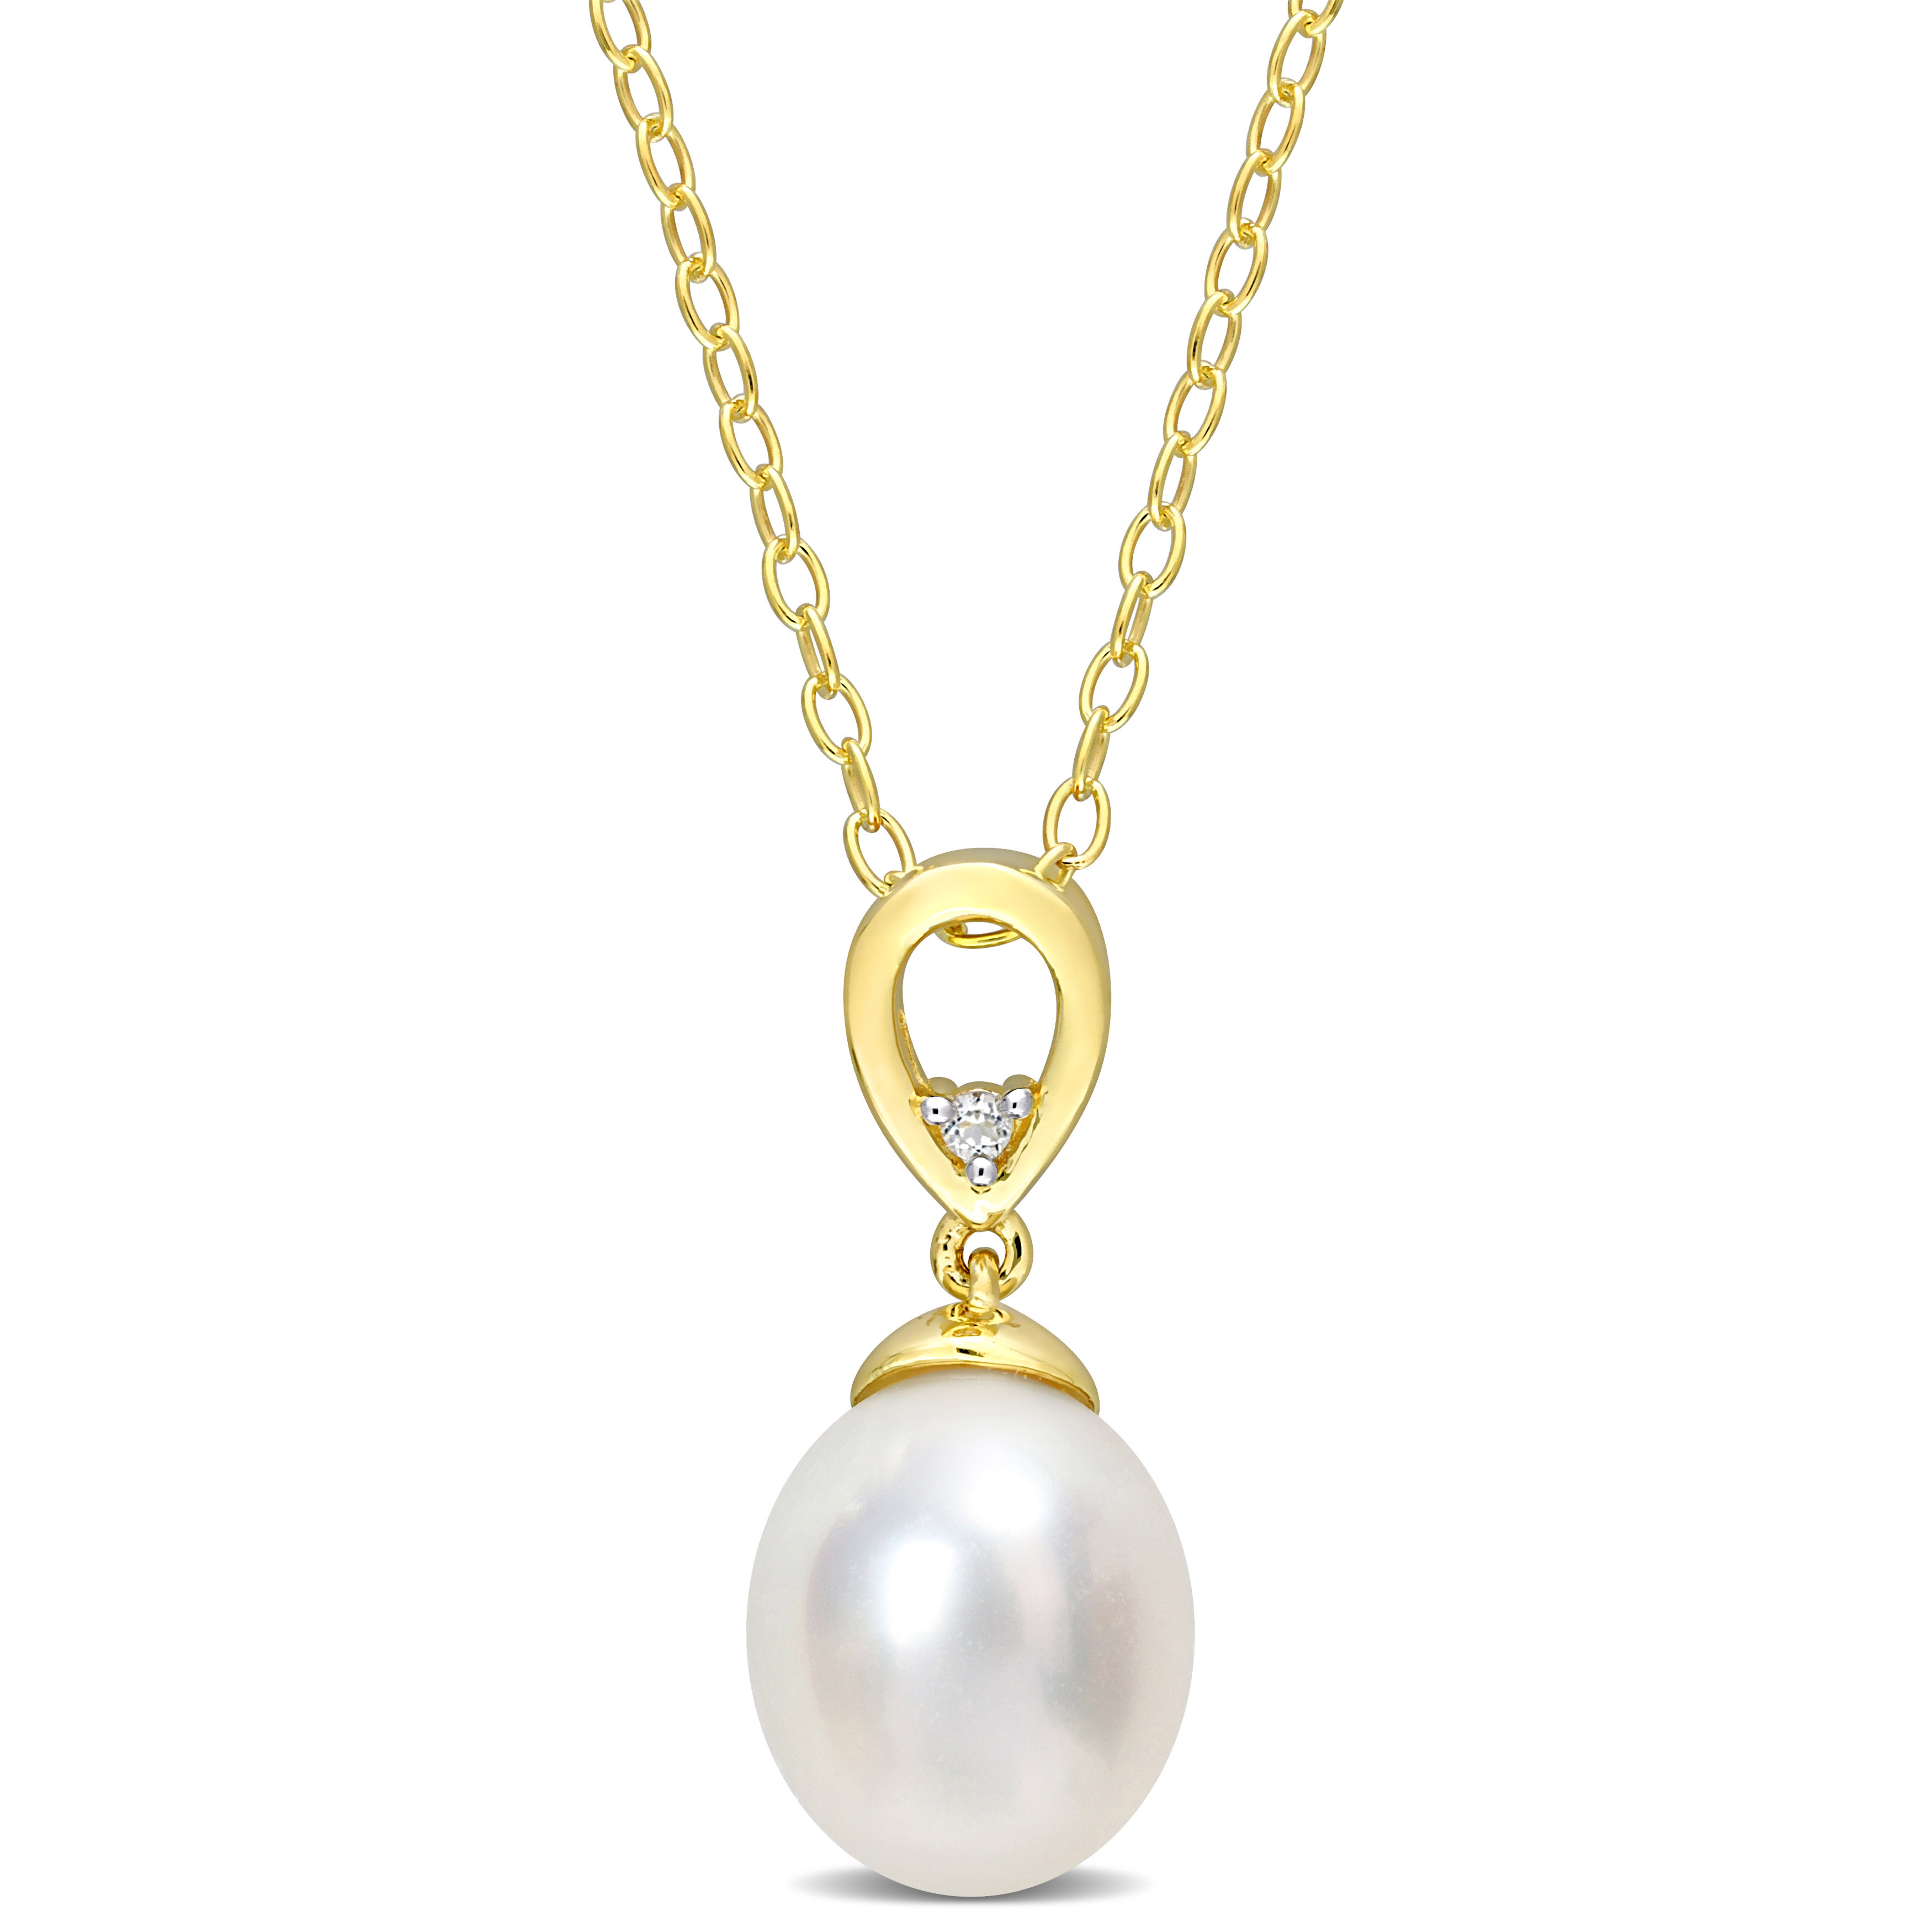 8-9 MM South Sea Cultured Pearl and White Topaz Drop Pendant with Chain in Yellow Plated Sterling Silver - 18 in.